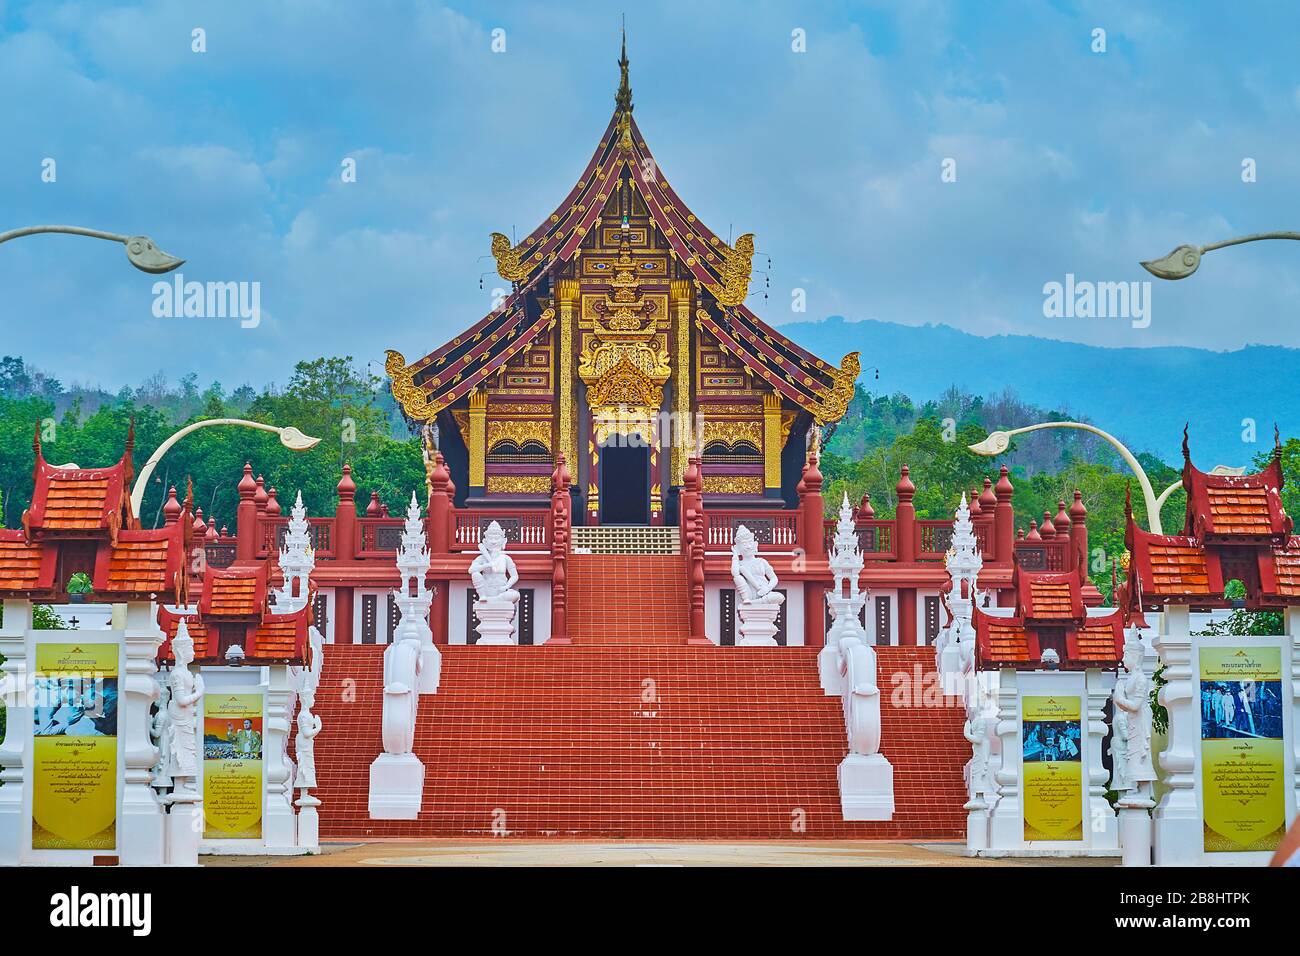 CHIANG MAI, THAILAND - MAY 7, 2019: Lanna style building of Royal pavilion of Rajapruek park with pyathat roof, gilt carvings, ornate bargeboards, rel Stock Photo